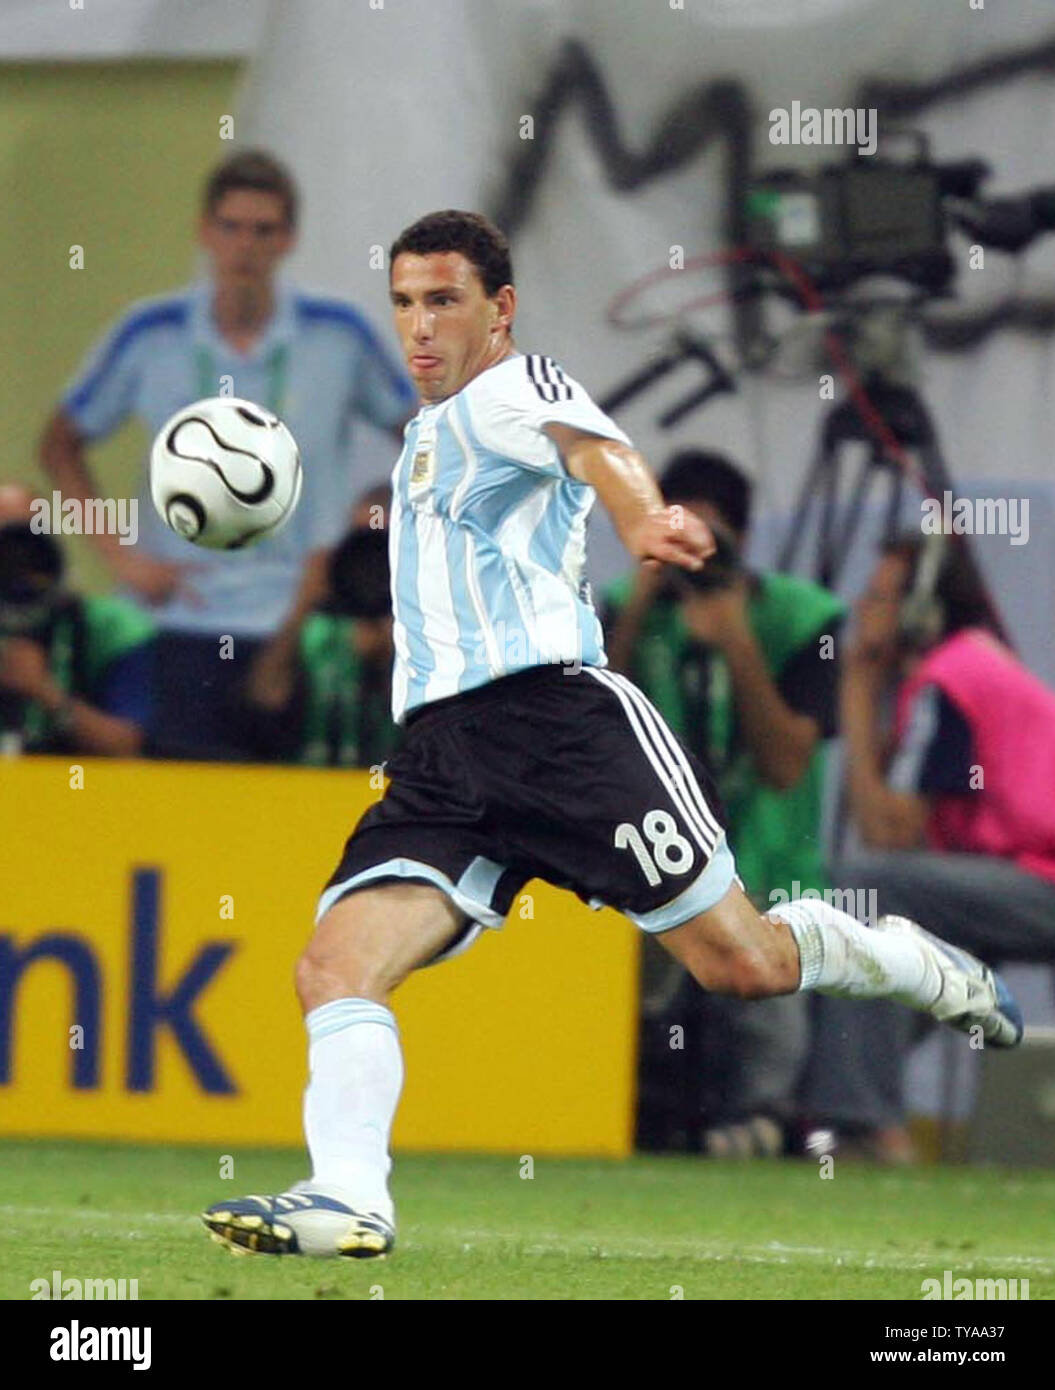 Argentina's Maxi Rodriguez scores the winner during the last 16 knock-out stage of the FIFA World Cup Germany 2006 at the Zentralstadion in Leipzig, Germany on June 24, 2006. Argentina needed extra-time and a wonder strike from Maxi Rodriguez to give them a 2-1 victory over Mexico and a place in the quarter-finals.   (UPI  Photo/Christian Brunskill) Stock Photo